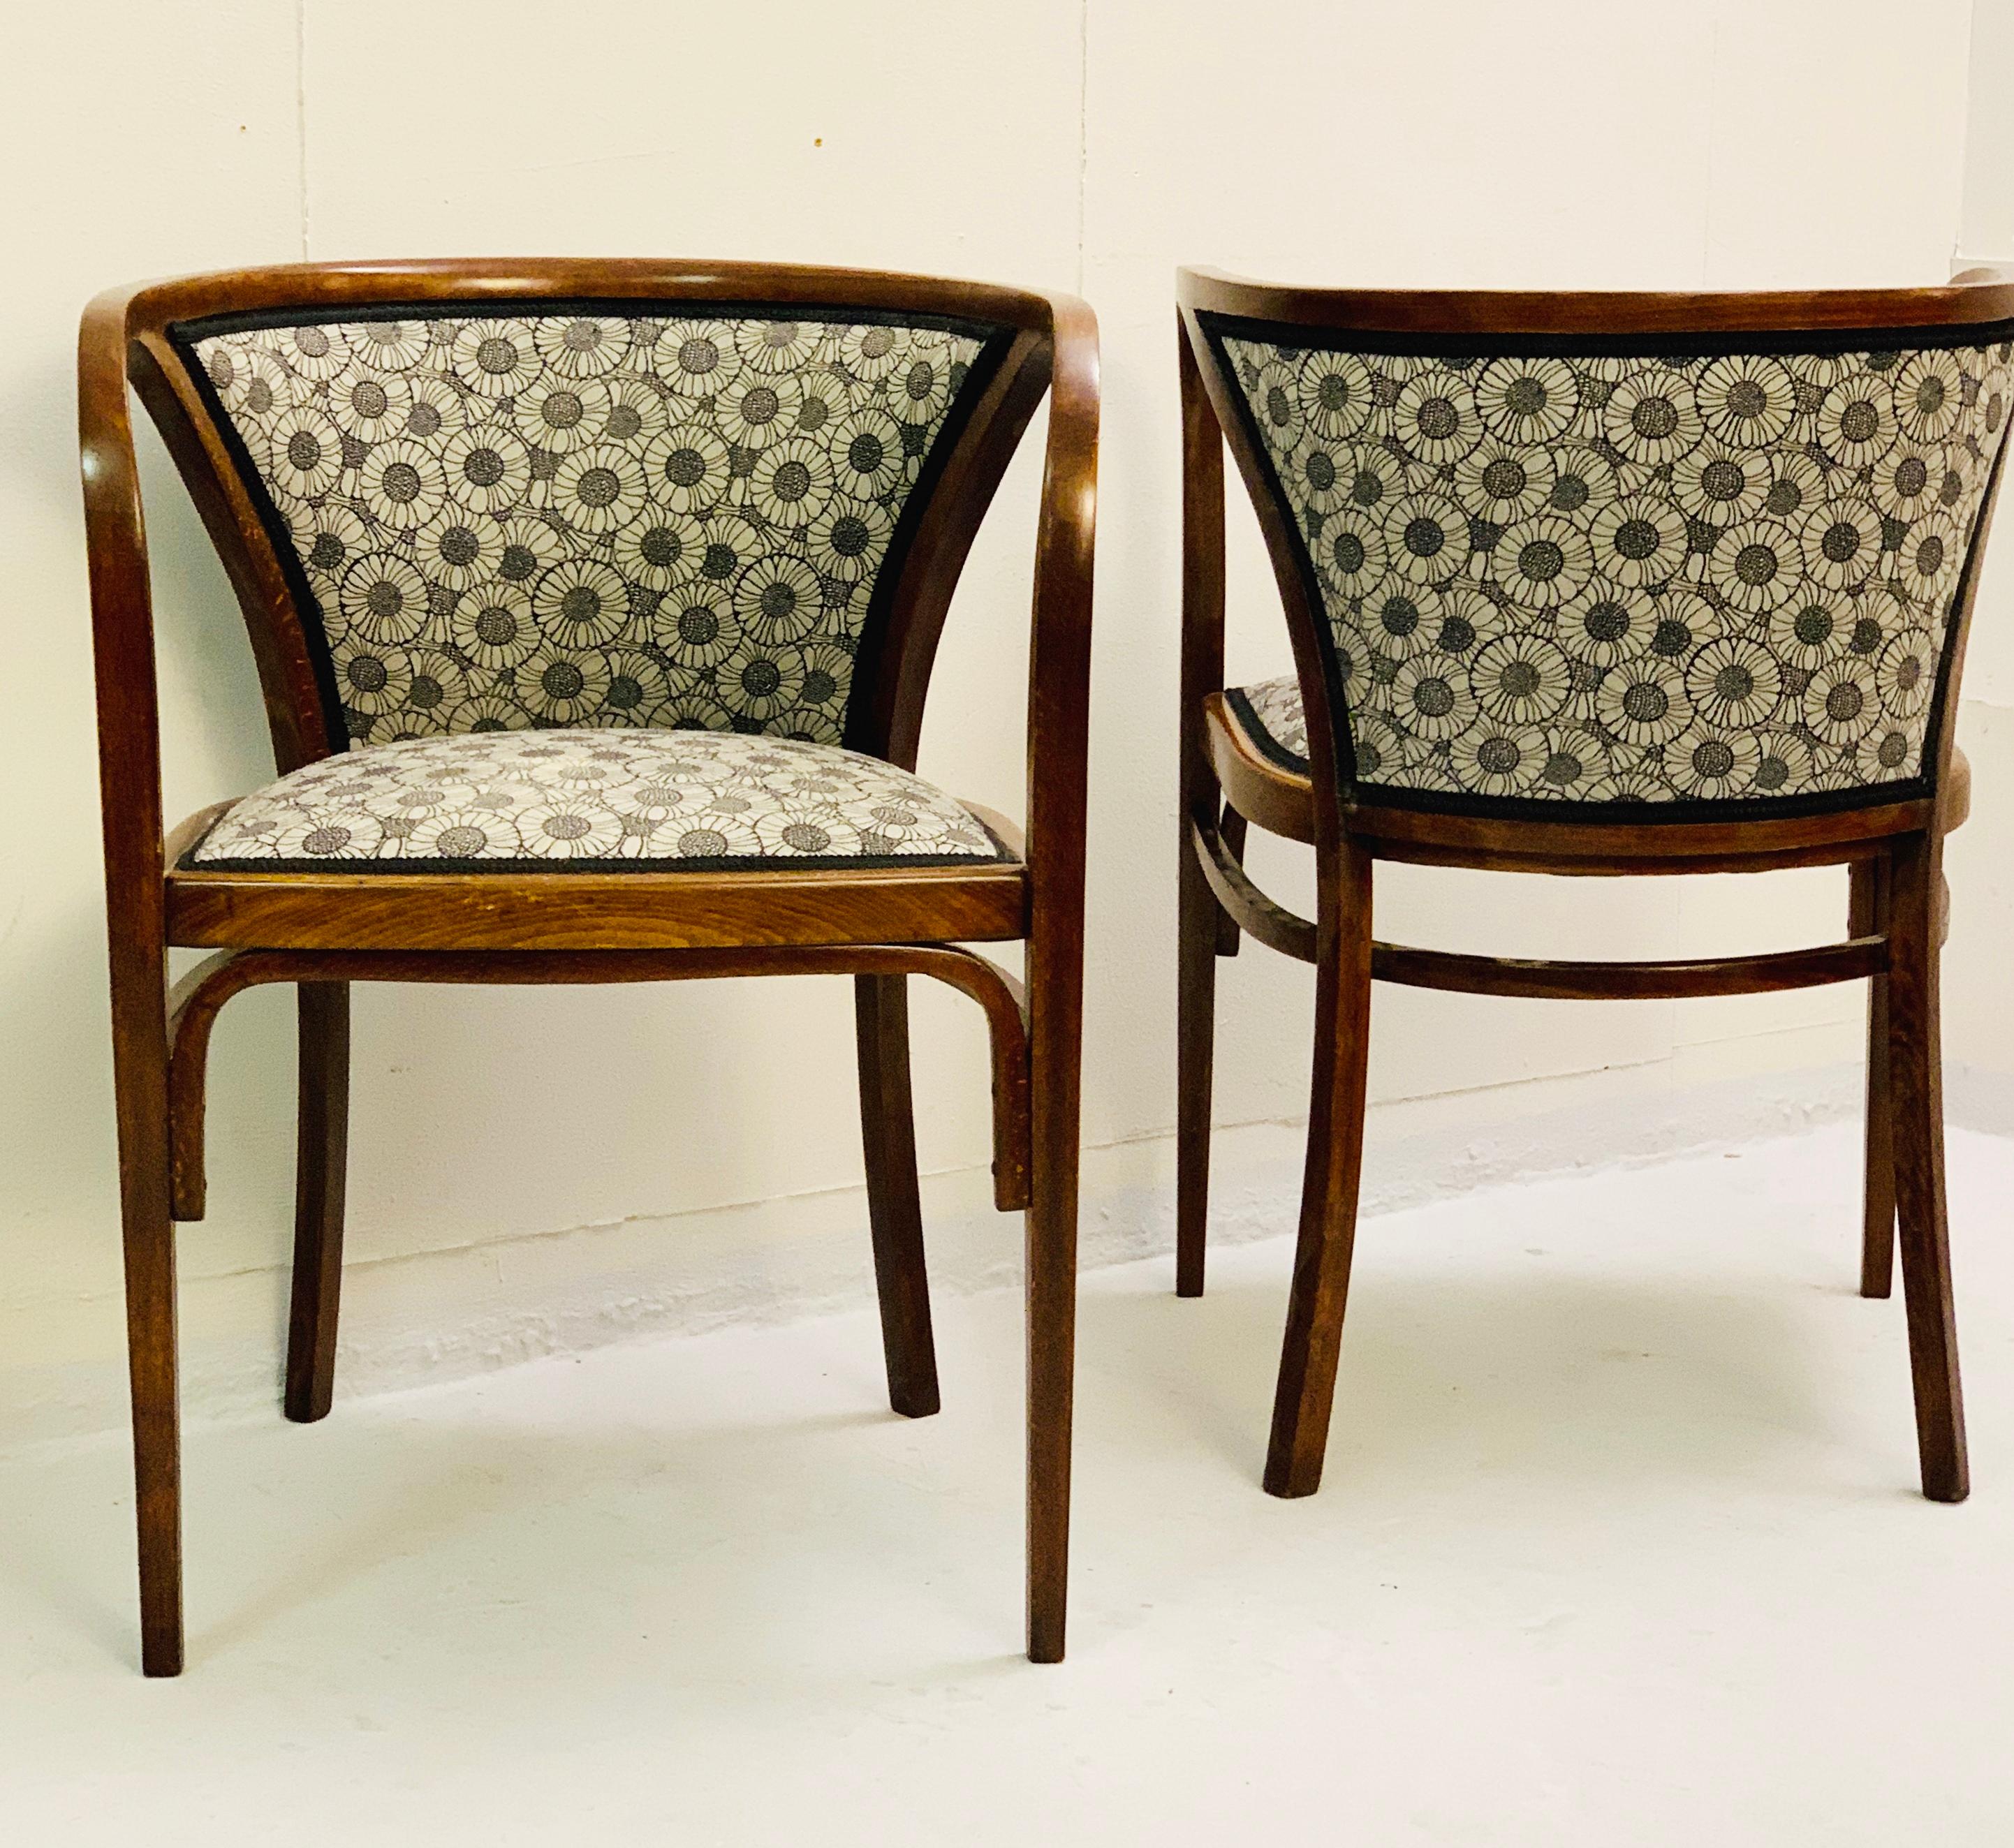 Pair of armchairs by Marcel Kammerer, Austria, 1905.